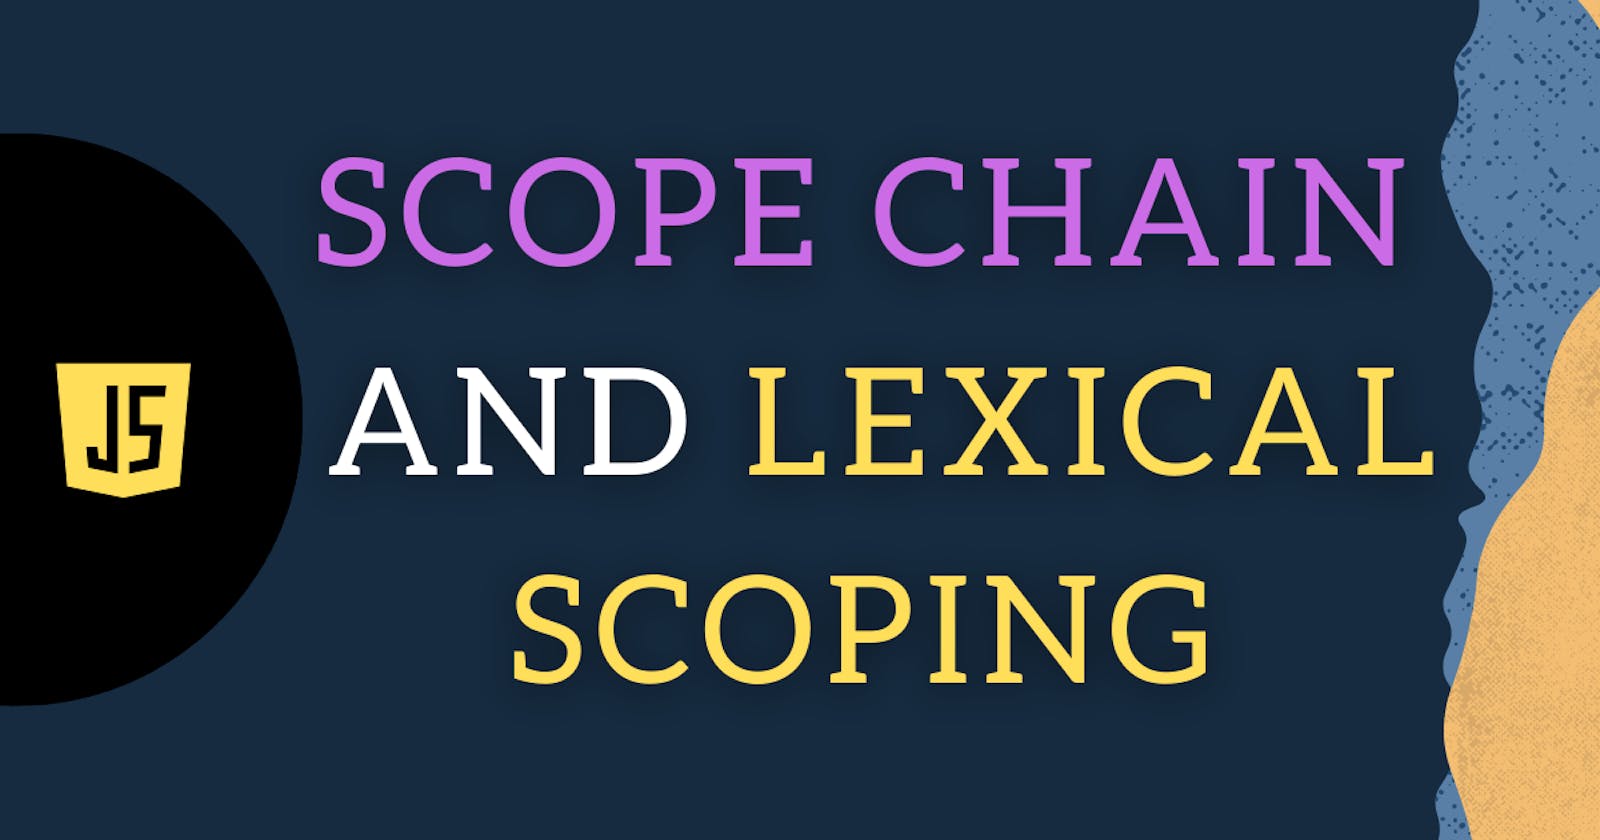 What is Scope chain and Lexical Scoping in JavaScript?